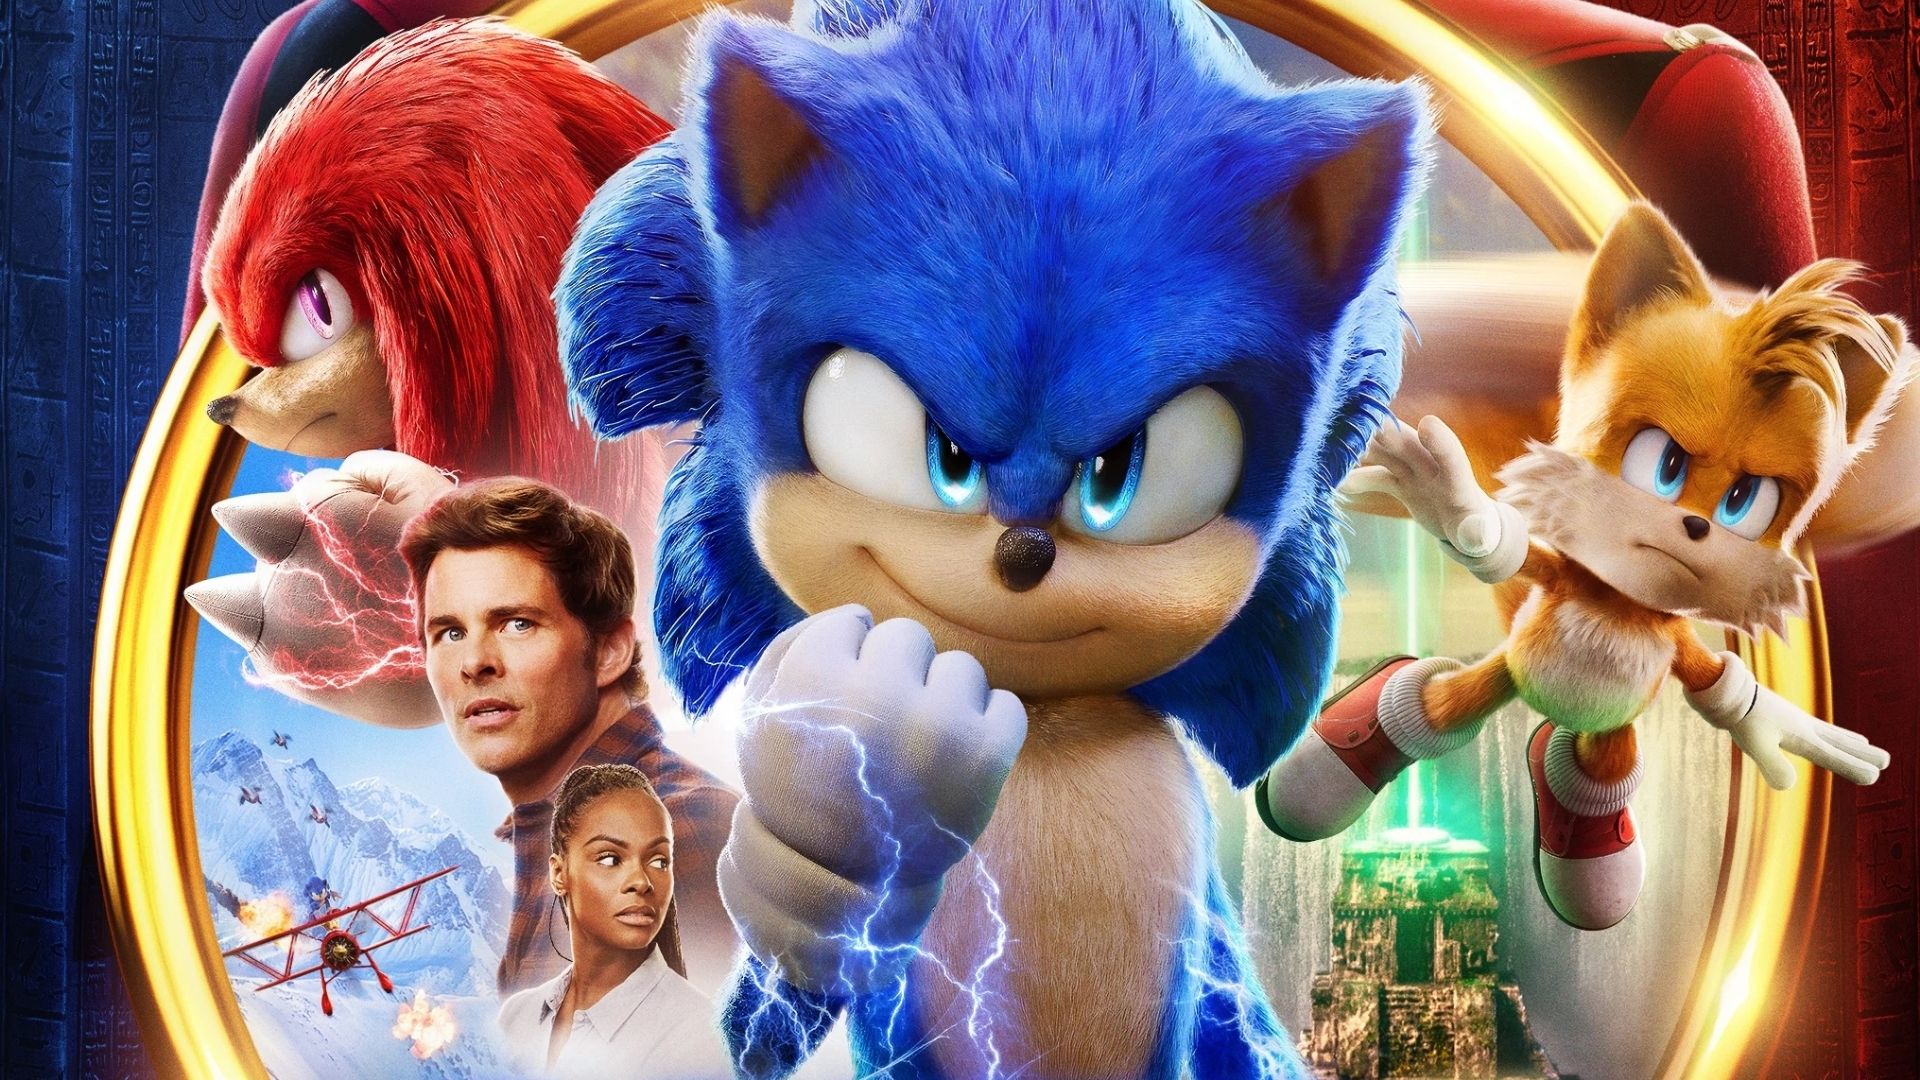 Paramount Pictures Brasil on X: ‼️ #AlertaOuriço ‼️ Se o #Sonic